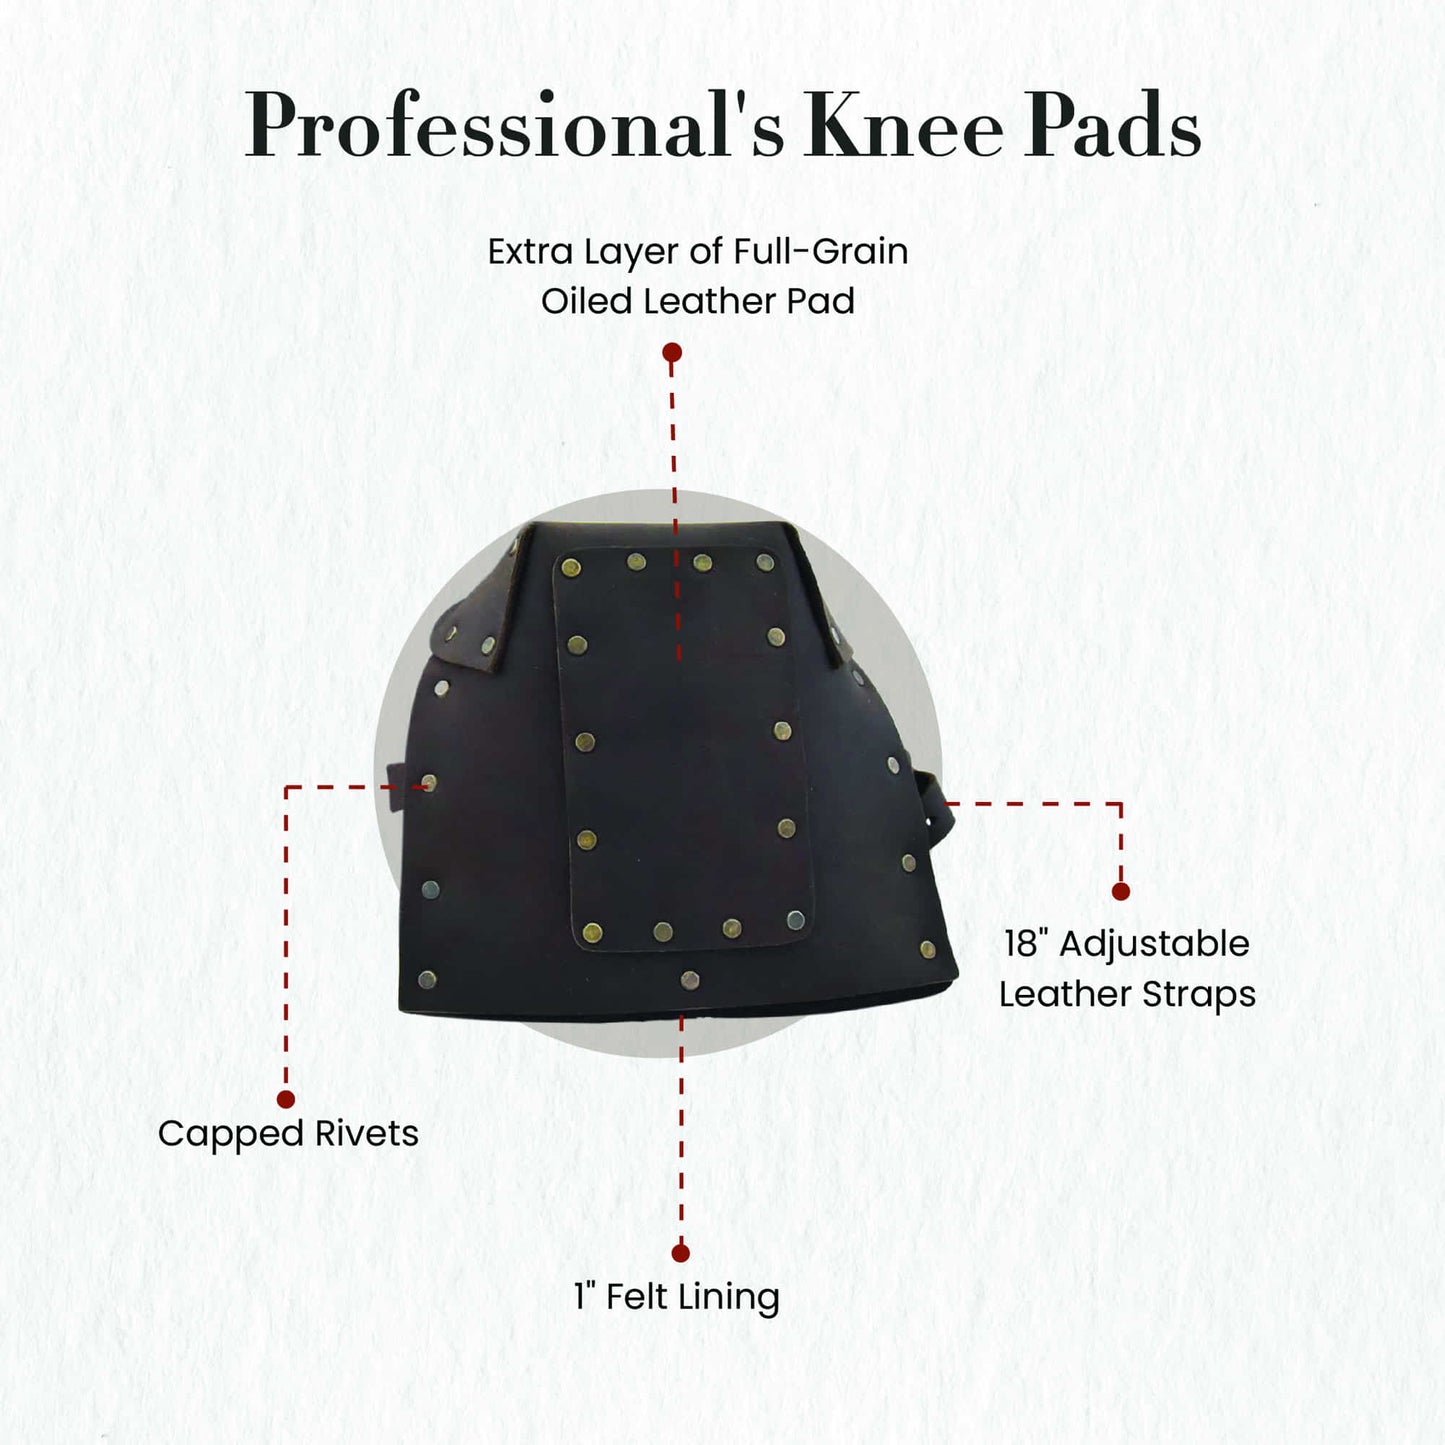 Style n Craft 74012 - Professional's Knee Pads in Heavy Full Grain Oiled Leather - Showing the details